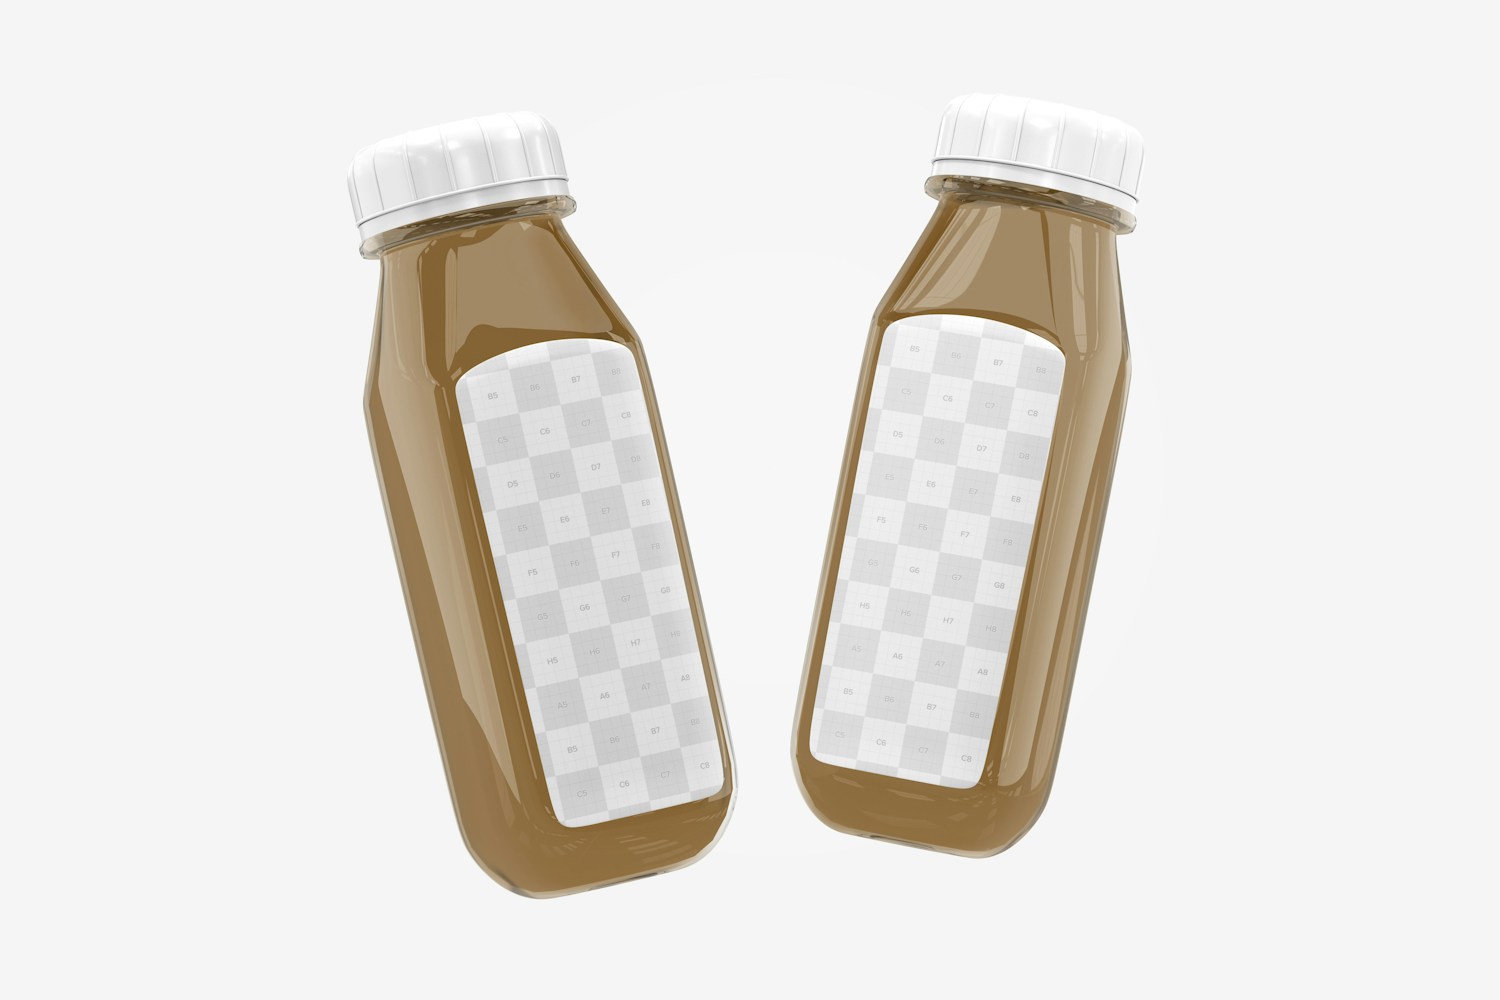 Iced Coffee Glass Bottles Mockup, Floating